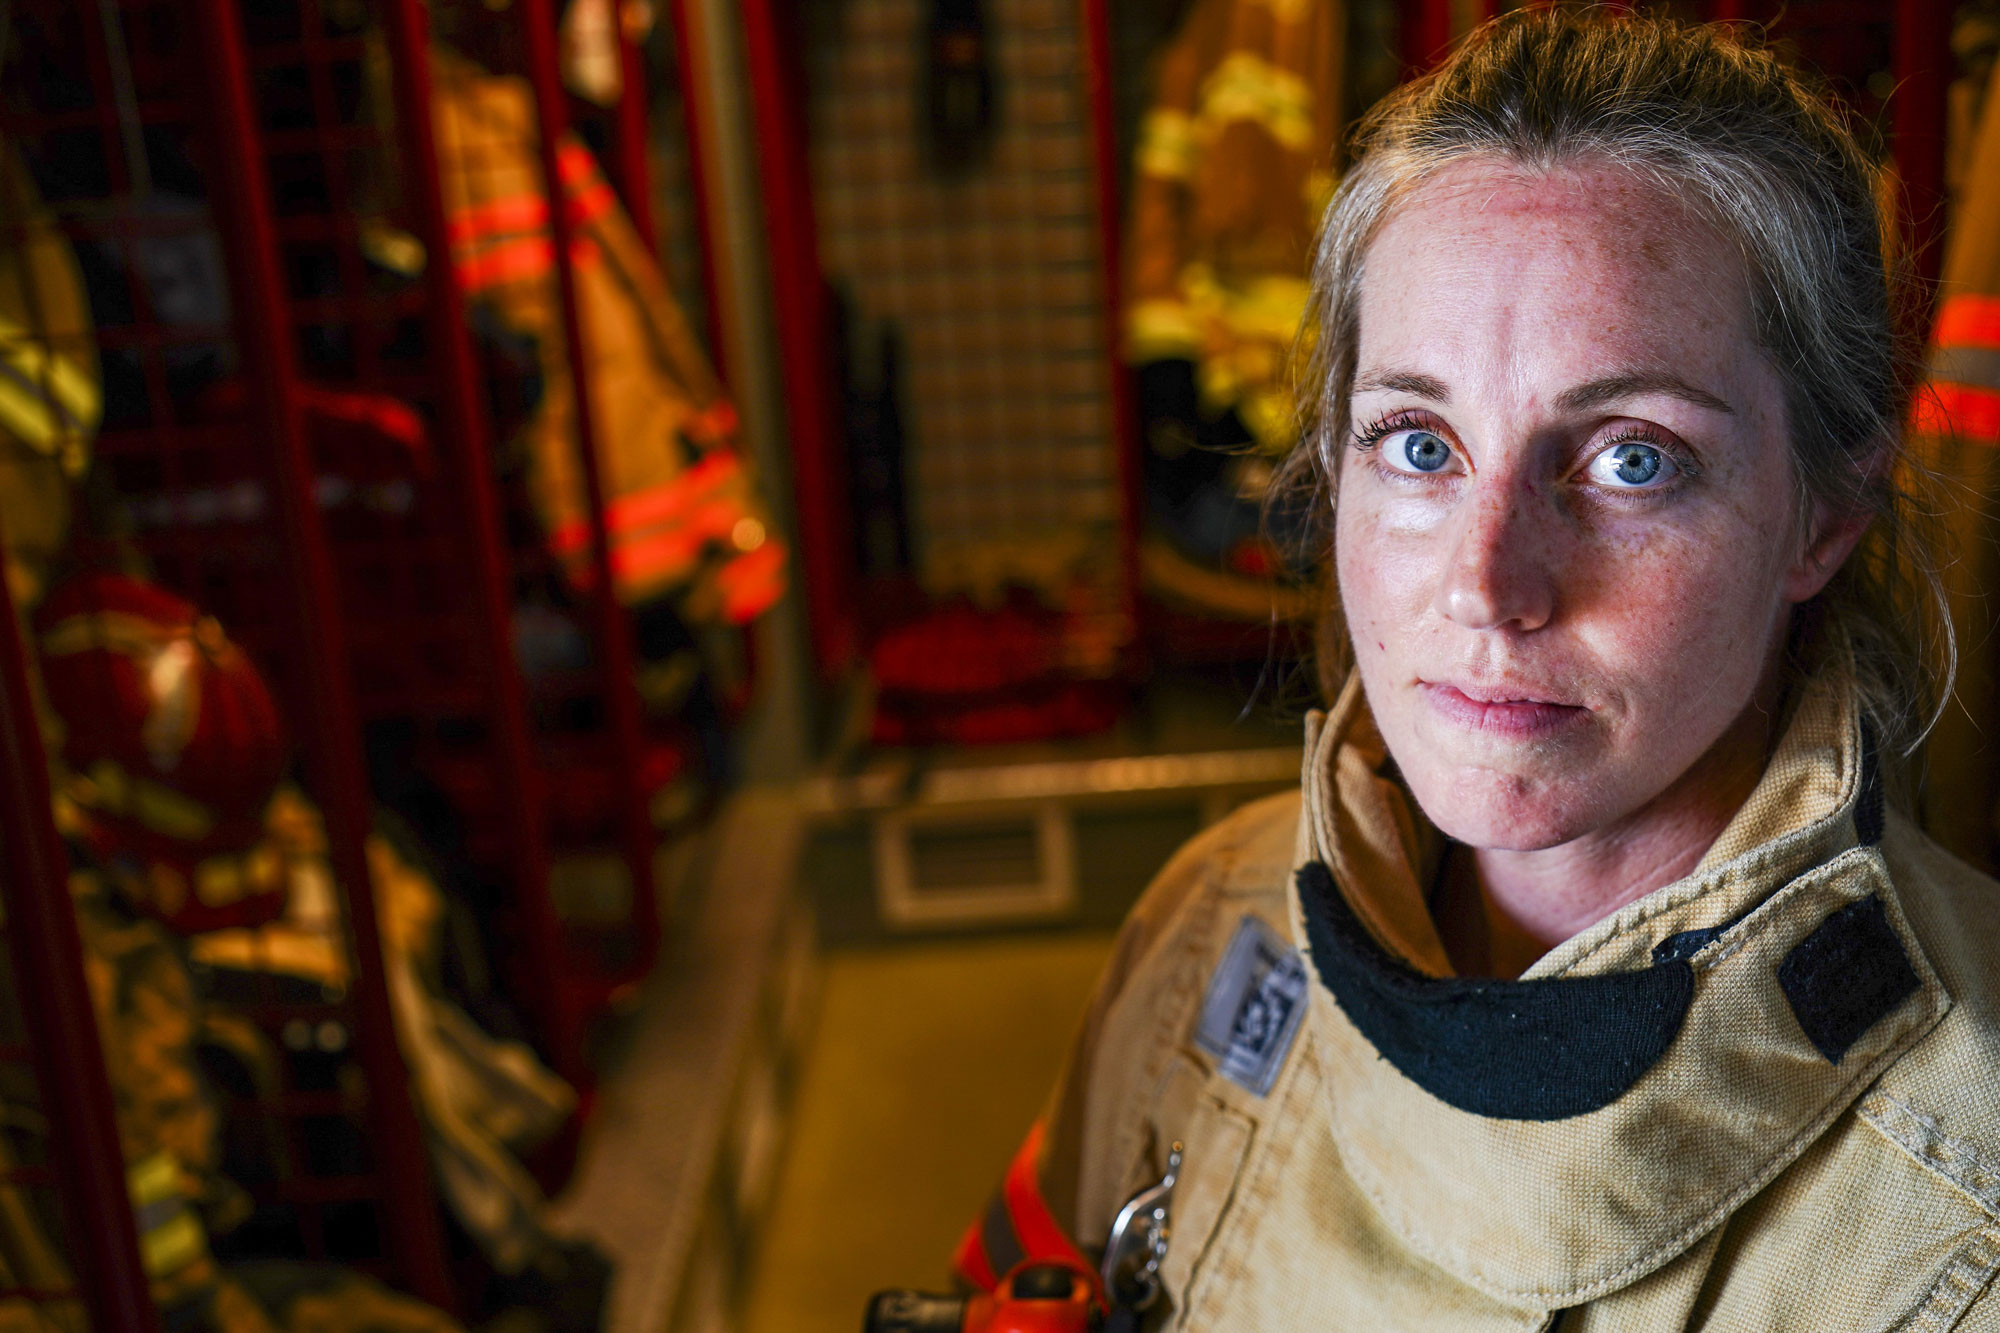 A female firefighter